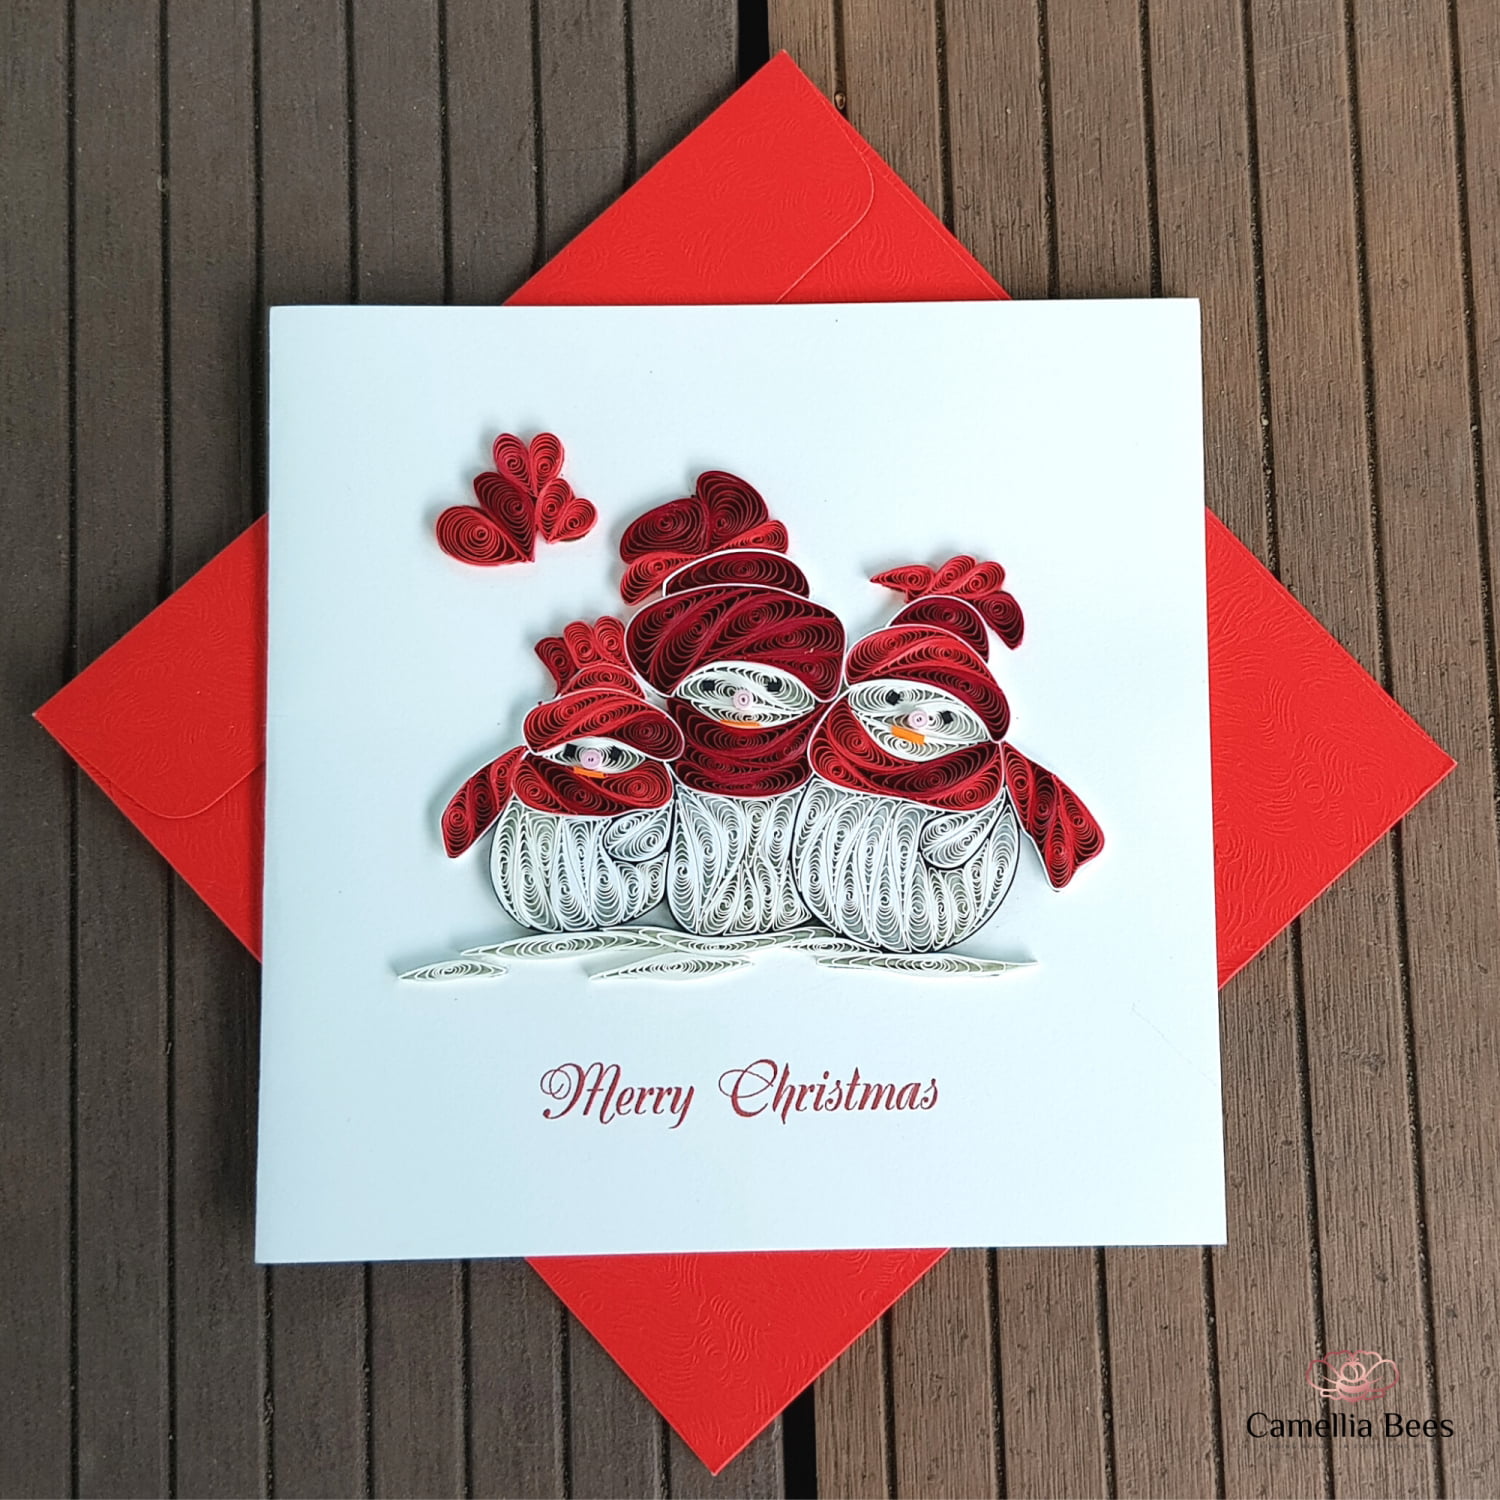 Red Xmas Blank Inside suitable for Framing Christmas Cards Assortment Set of 3 cards-1 of each design Handmade Quilling Art 3D Holiday Greeting Cards with Envelopes 6x6. 